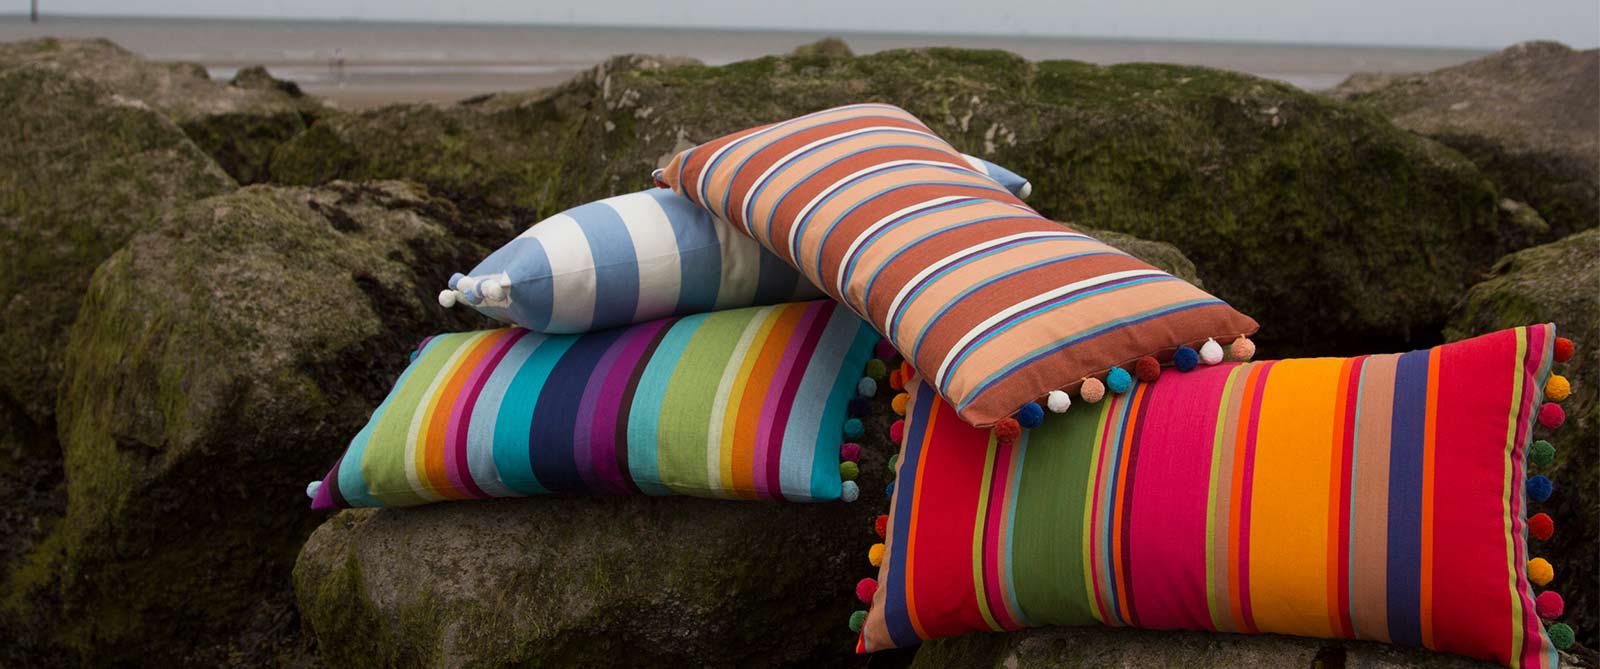 Orange, Blue, Jade Green, Yellow, Red Striped Oblong Cushions with Bobble Fringe